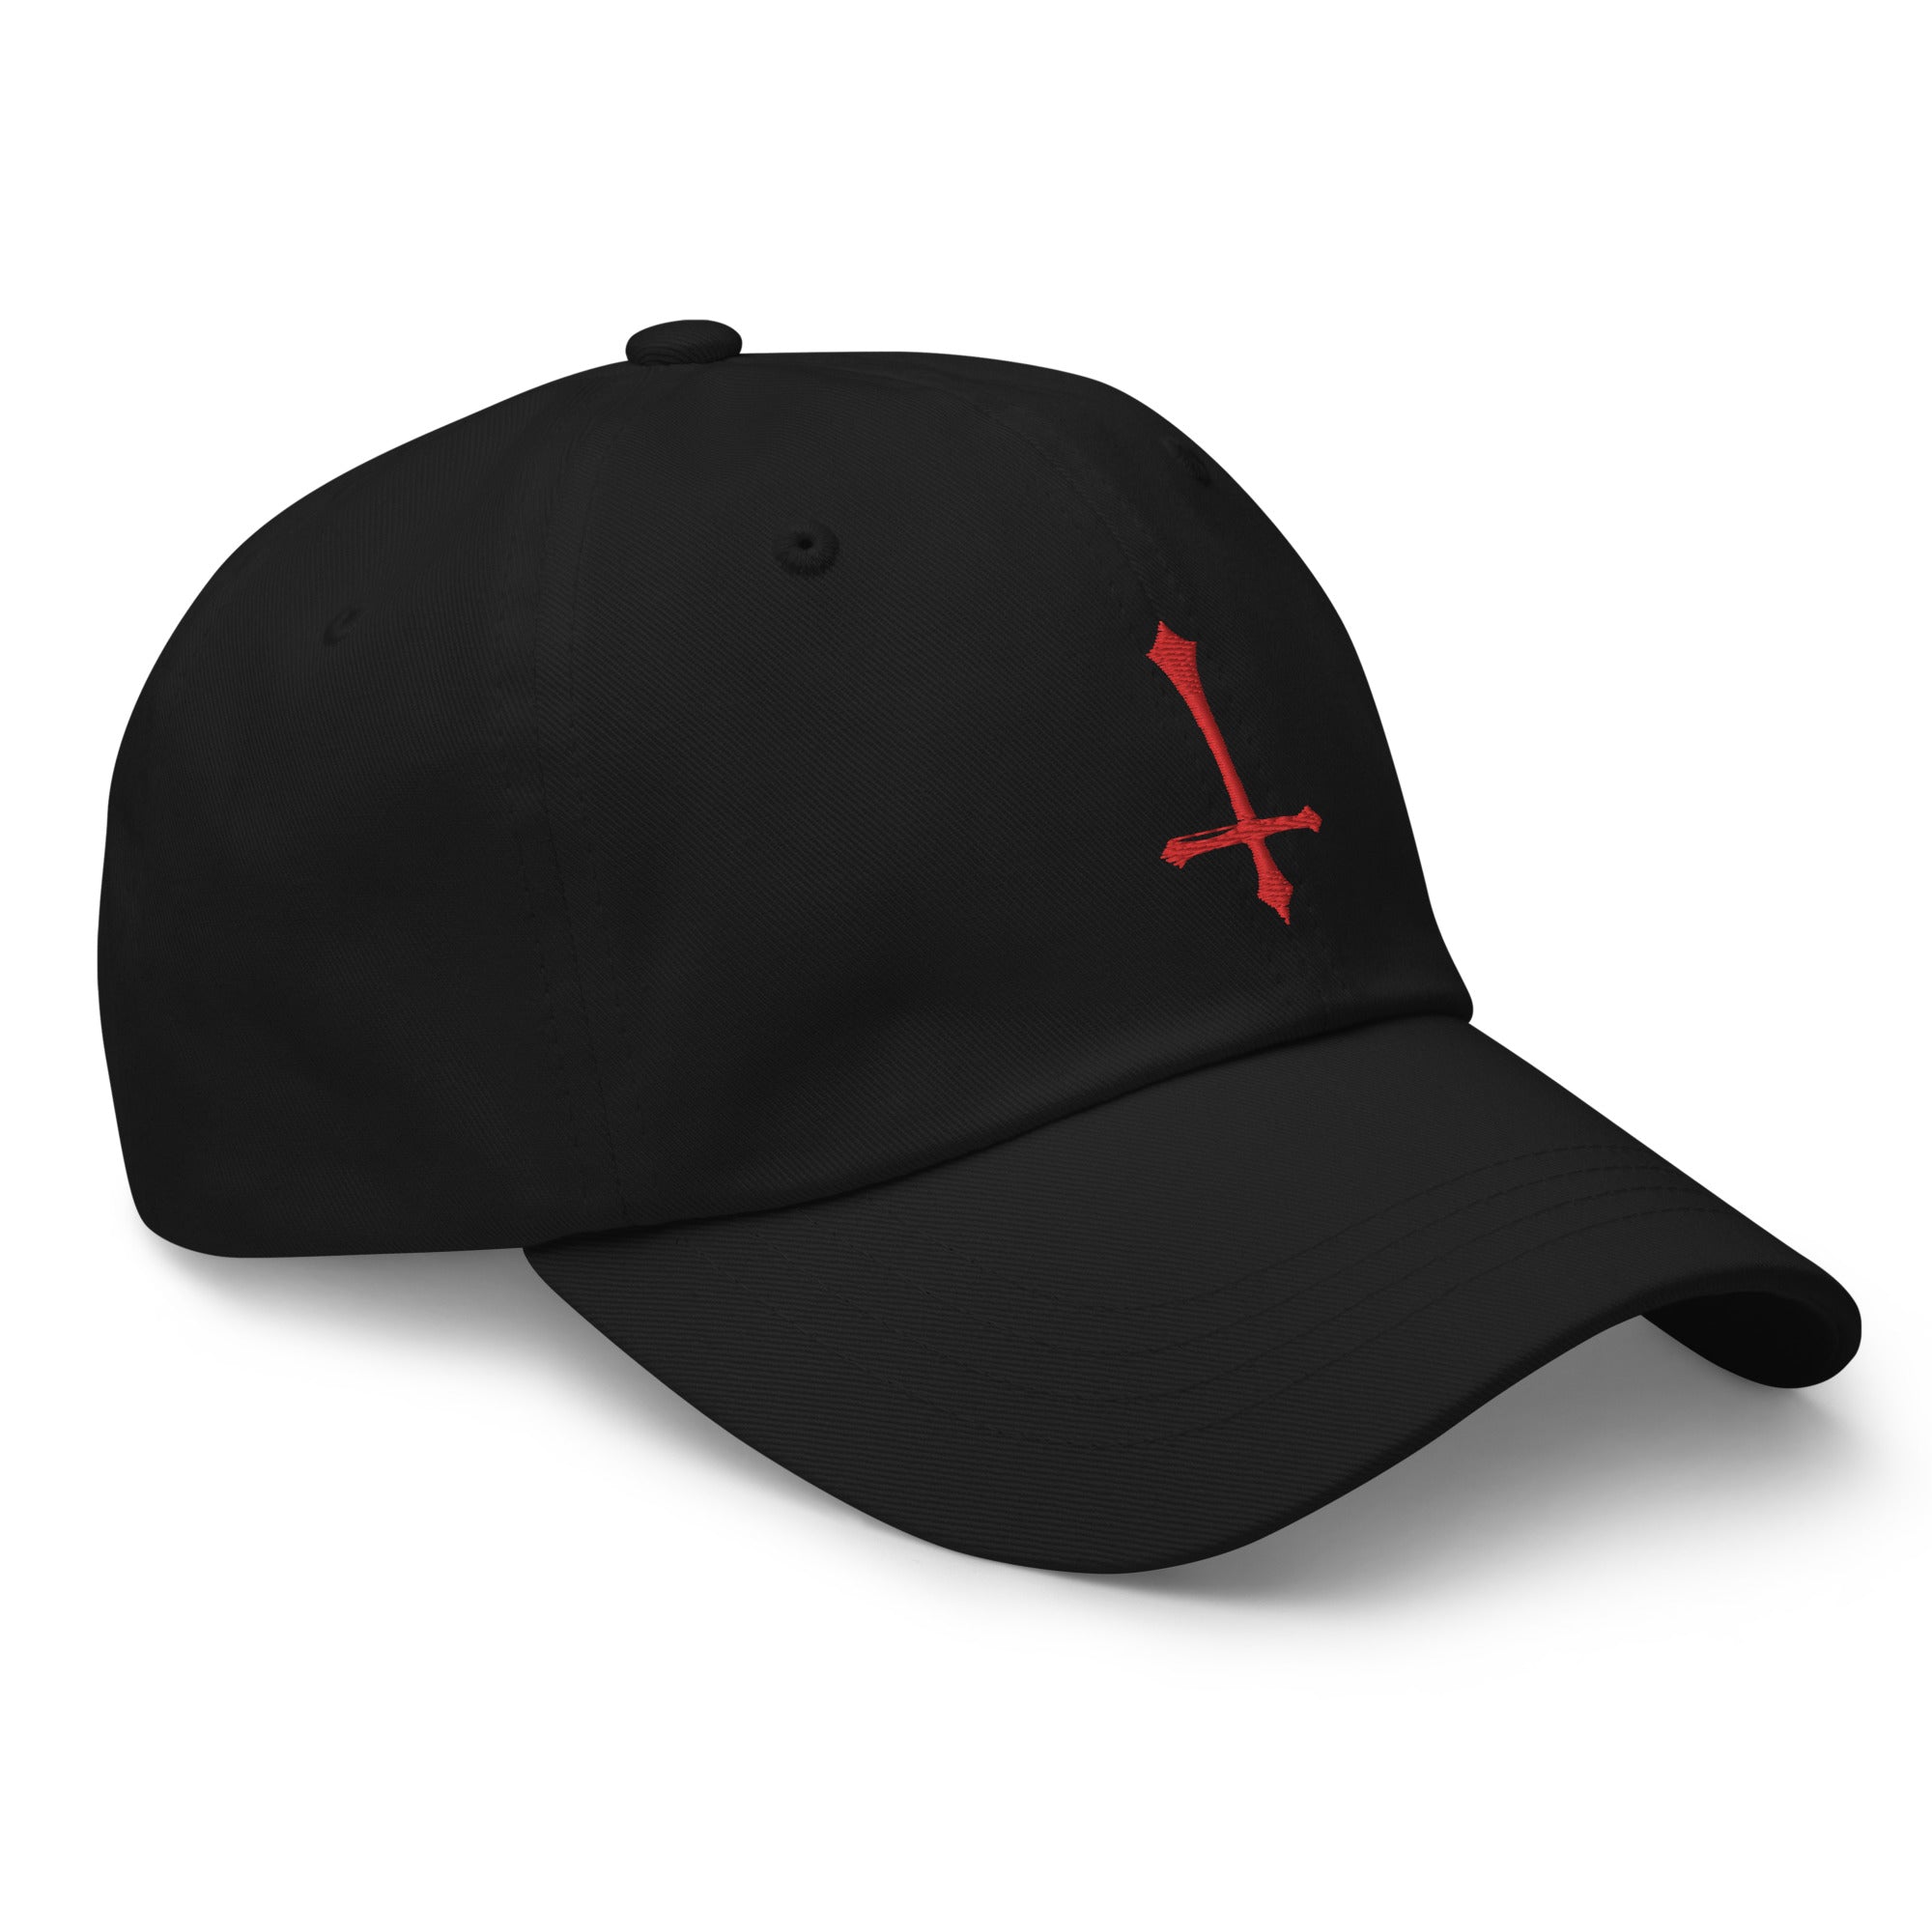 Red Inverted Cross Embroidered Baseball Cap Gothic Ancient Medeival Style Dad hat - Edge of Life Designs